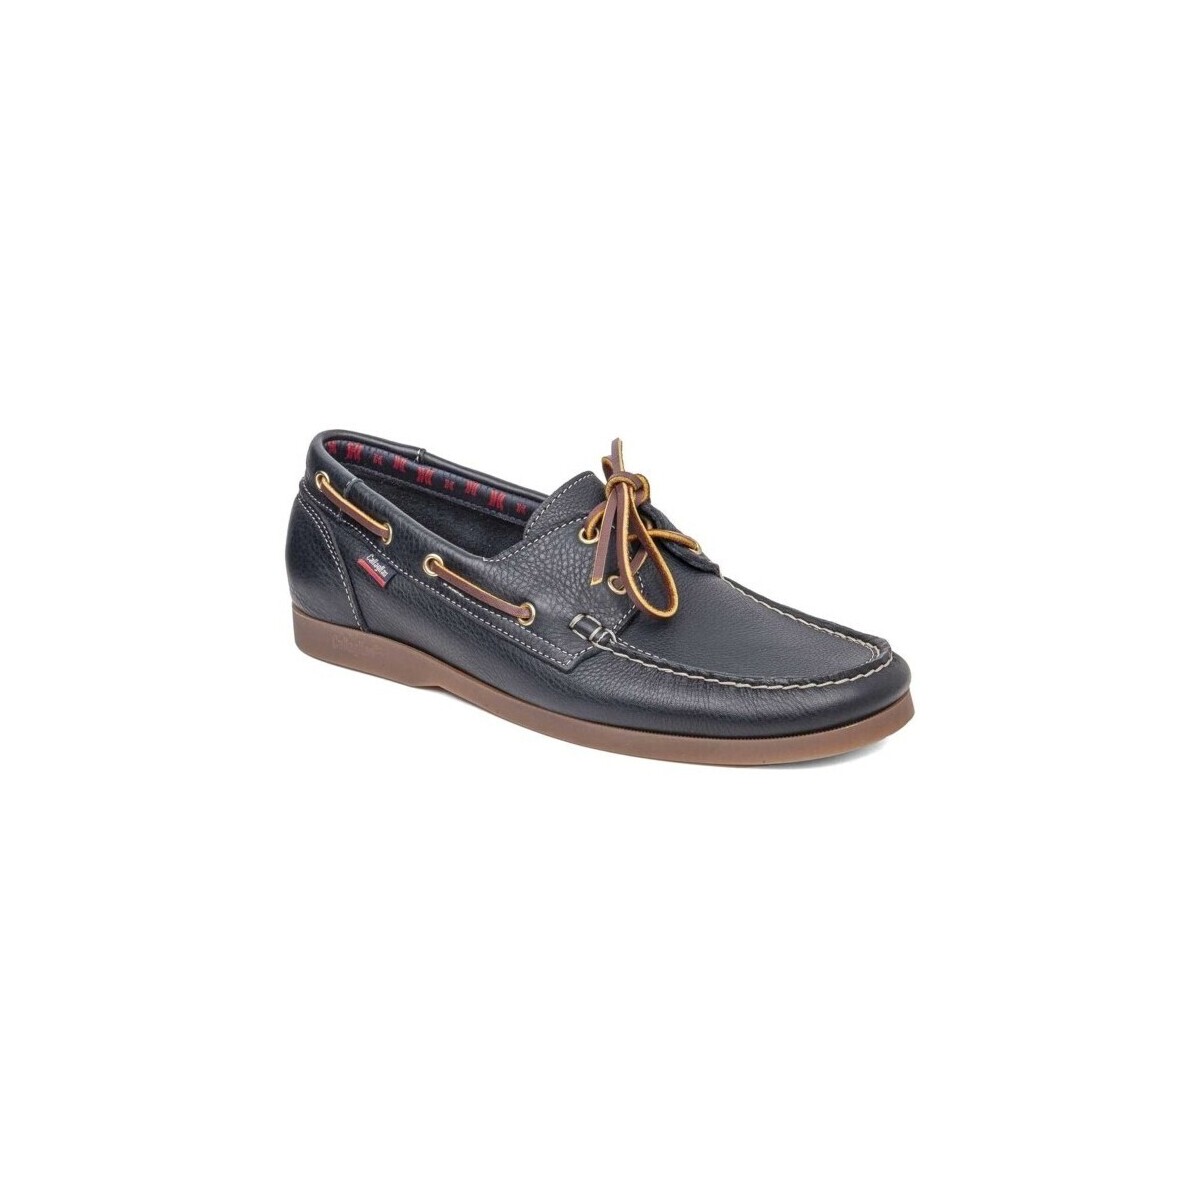 Boat shoes CallagHan 27547-24